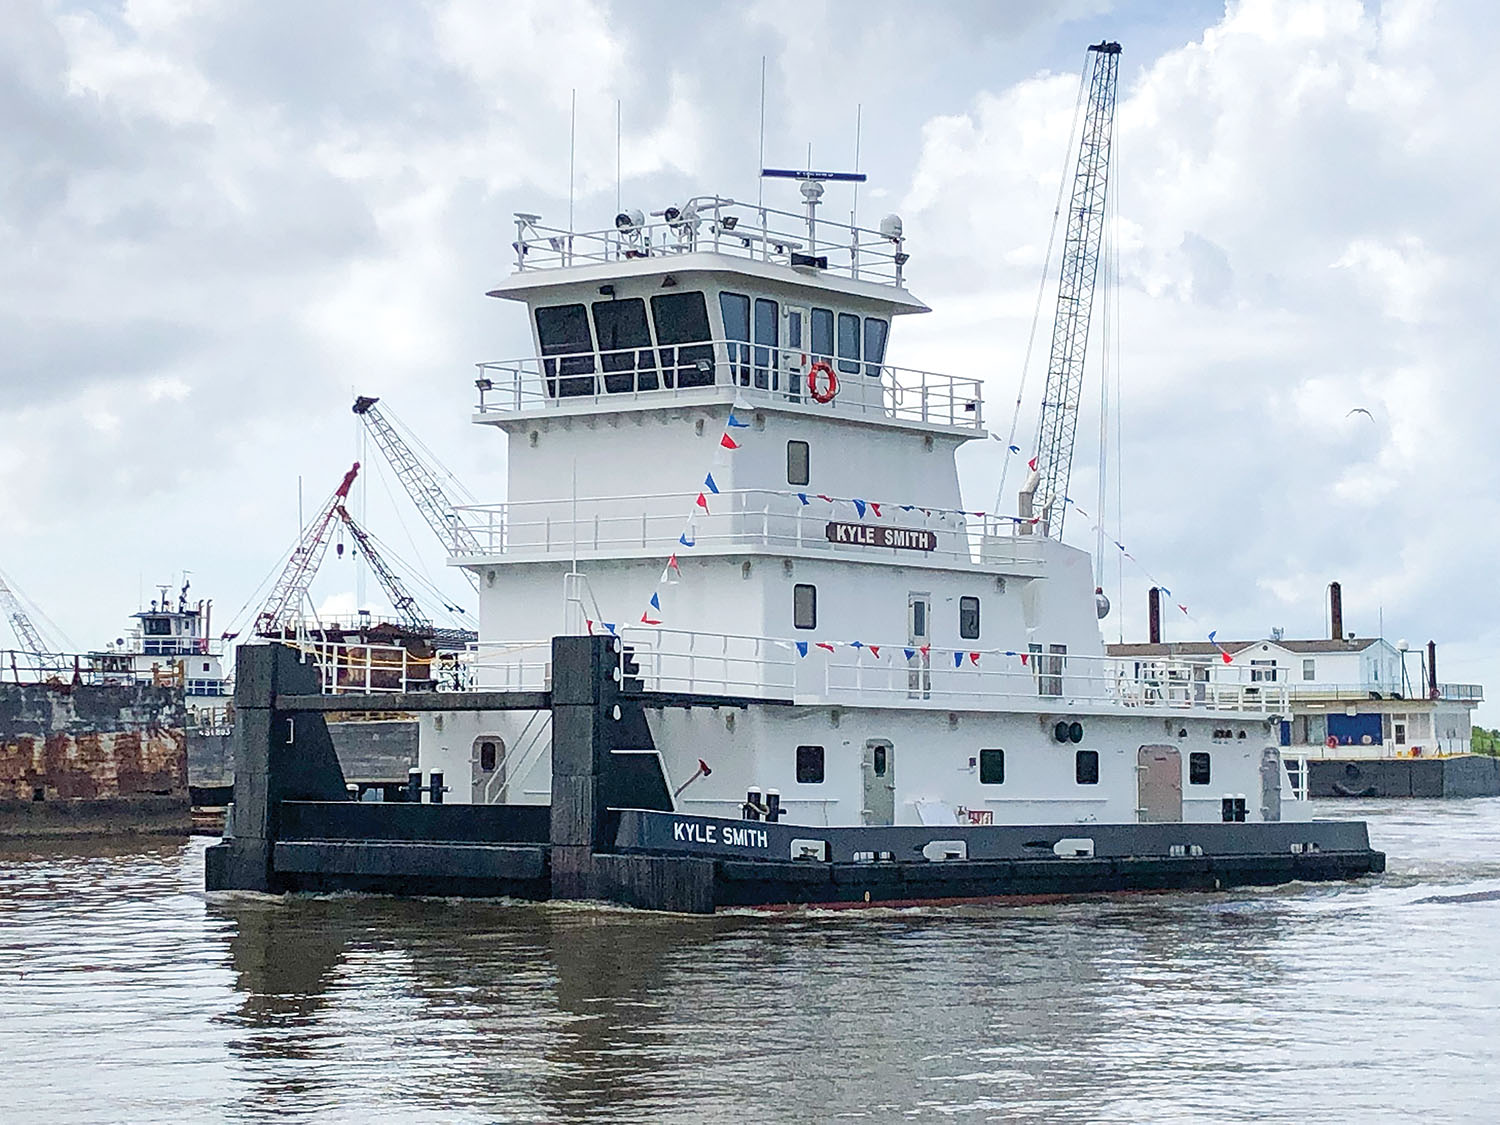 Built by Eymard Marine Construction, the mv. Kyle Smith has 2,000 hp. from two Caterpiller C32 engines. (Photo courtesy of Eymard Marine Construction)